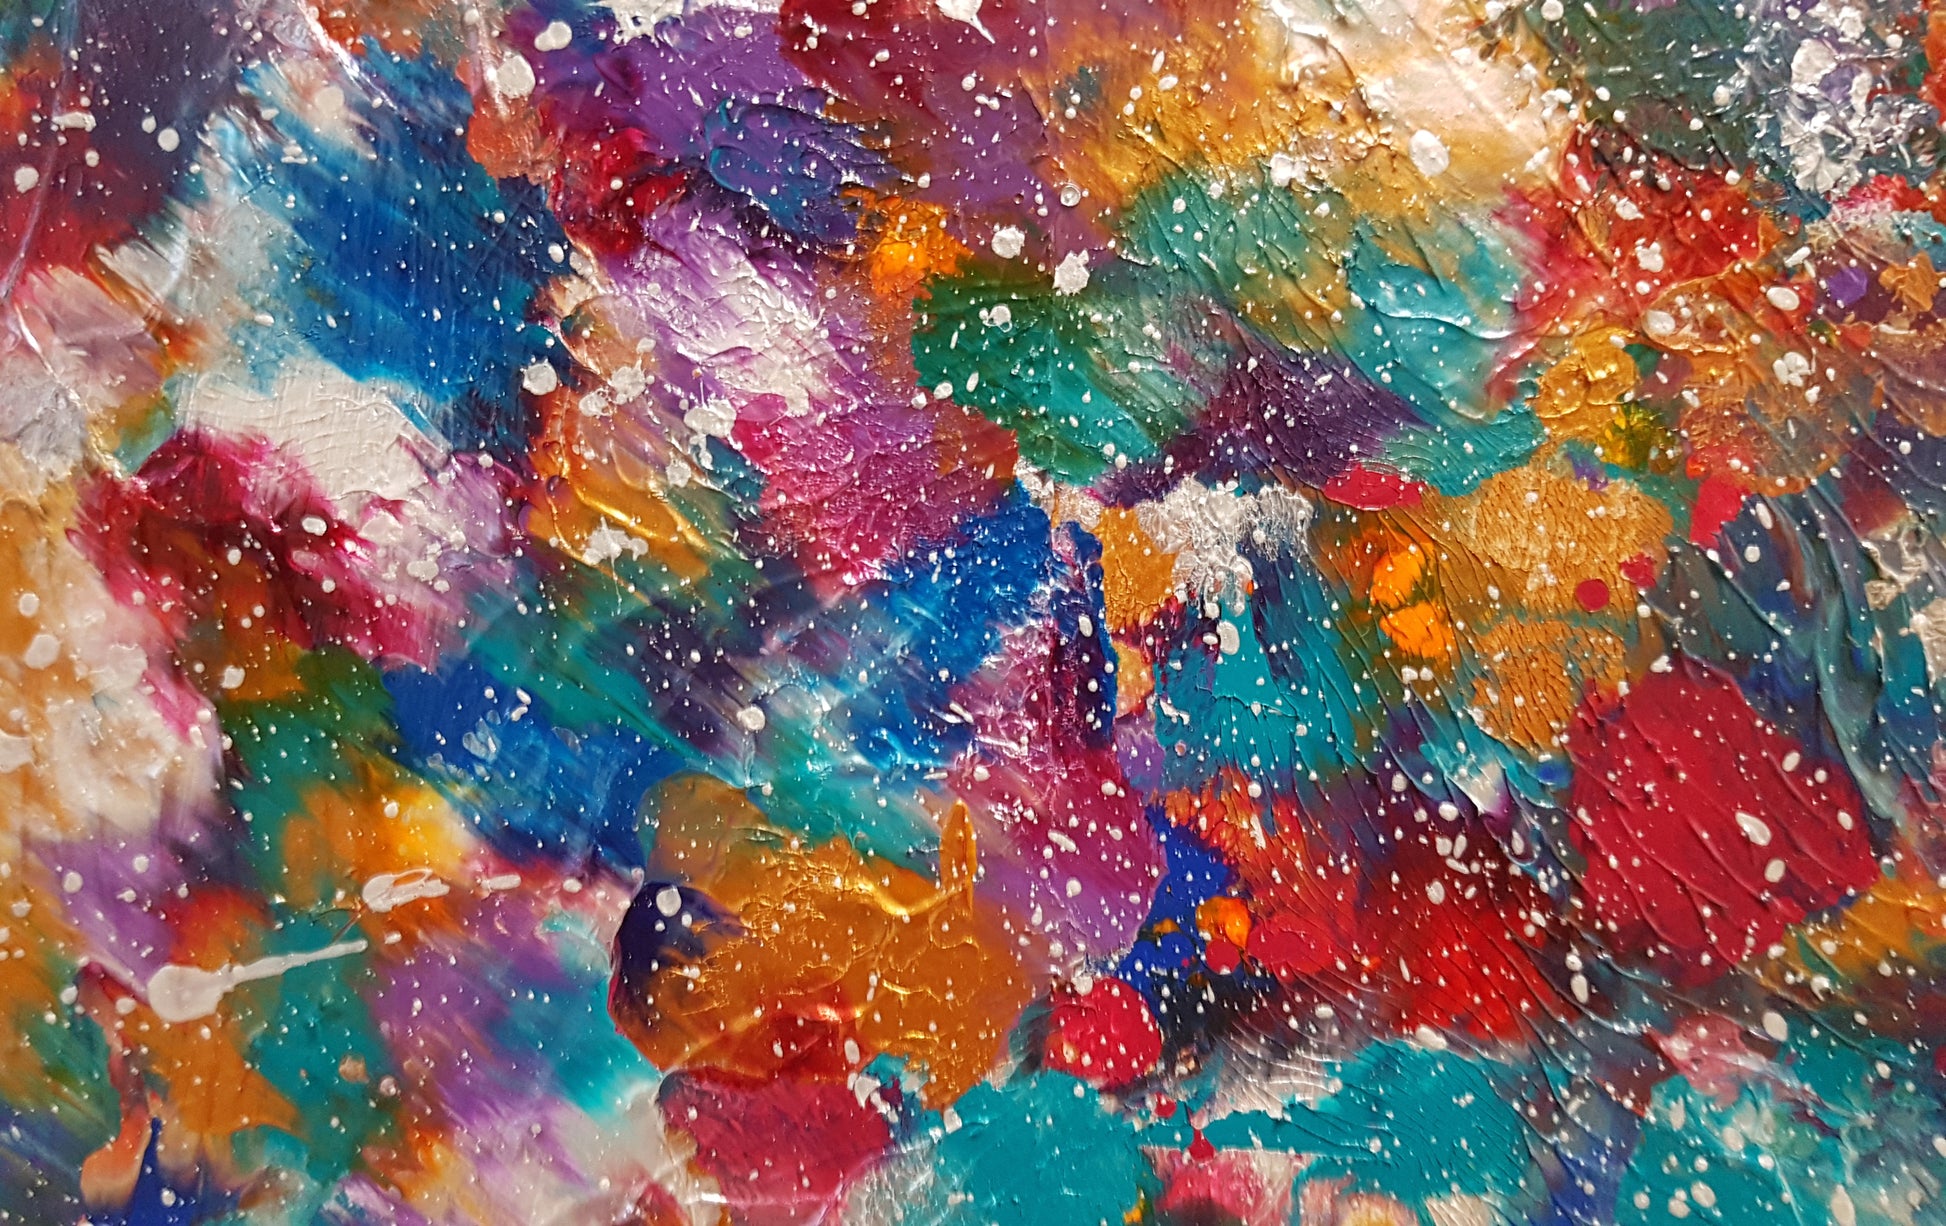 Cosmic-Garden-Alexandra-Romano-Art-Buy-Abstract-Paintings-Online-Shopping-Gallery-Bold-Vibrant-Artworks-Textured-Home-Decor-Sale